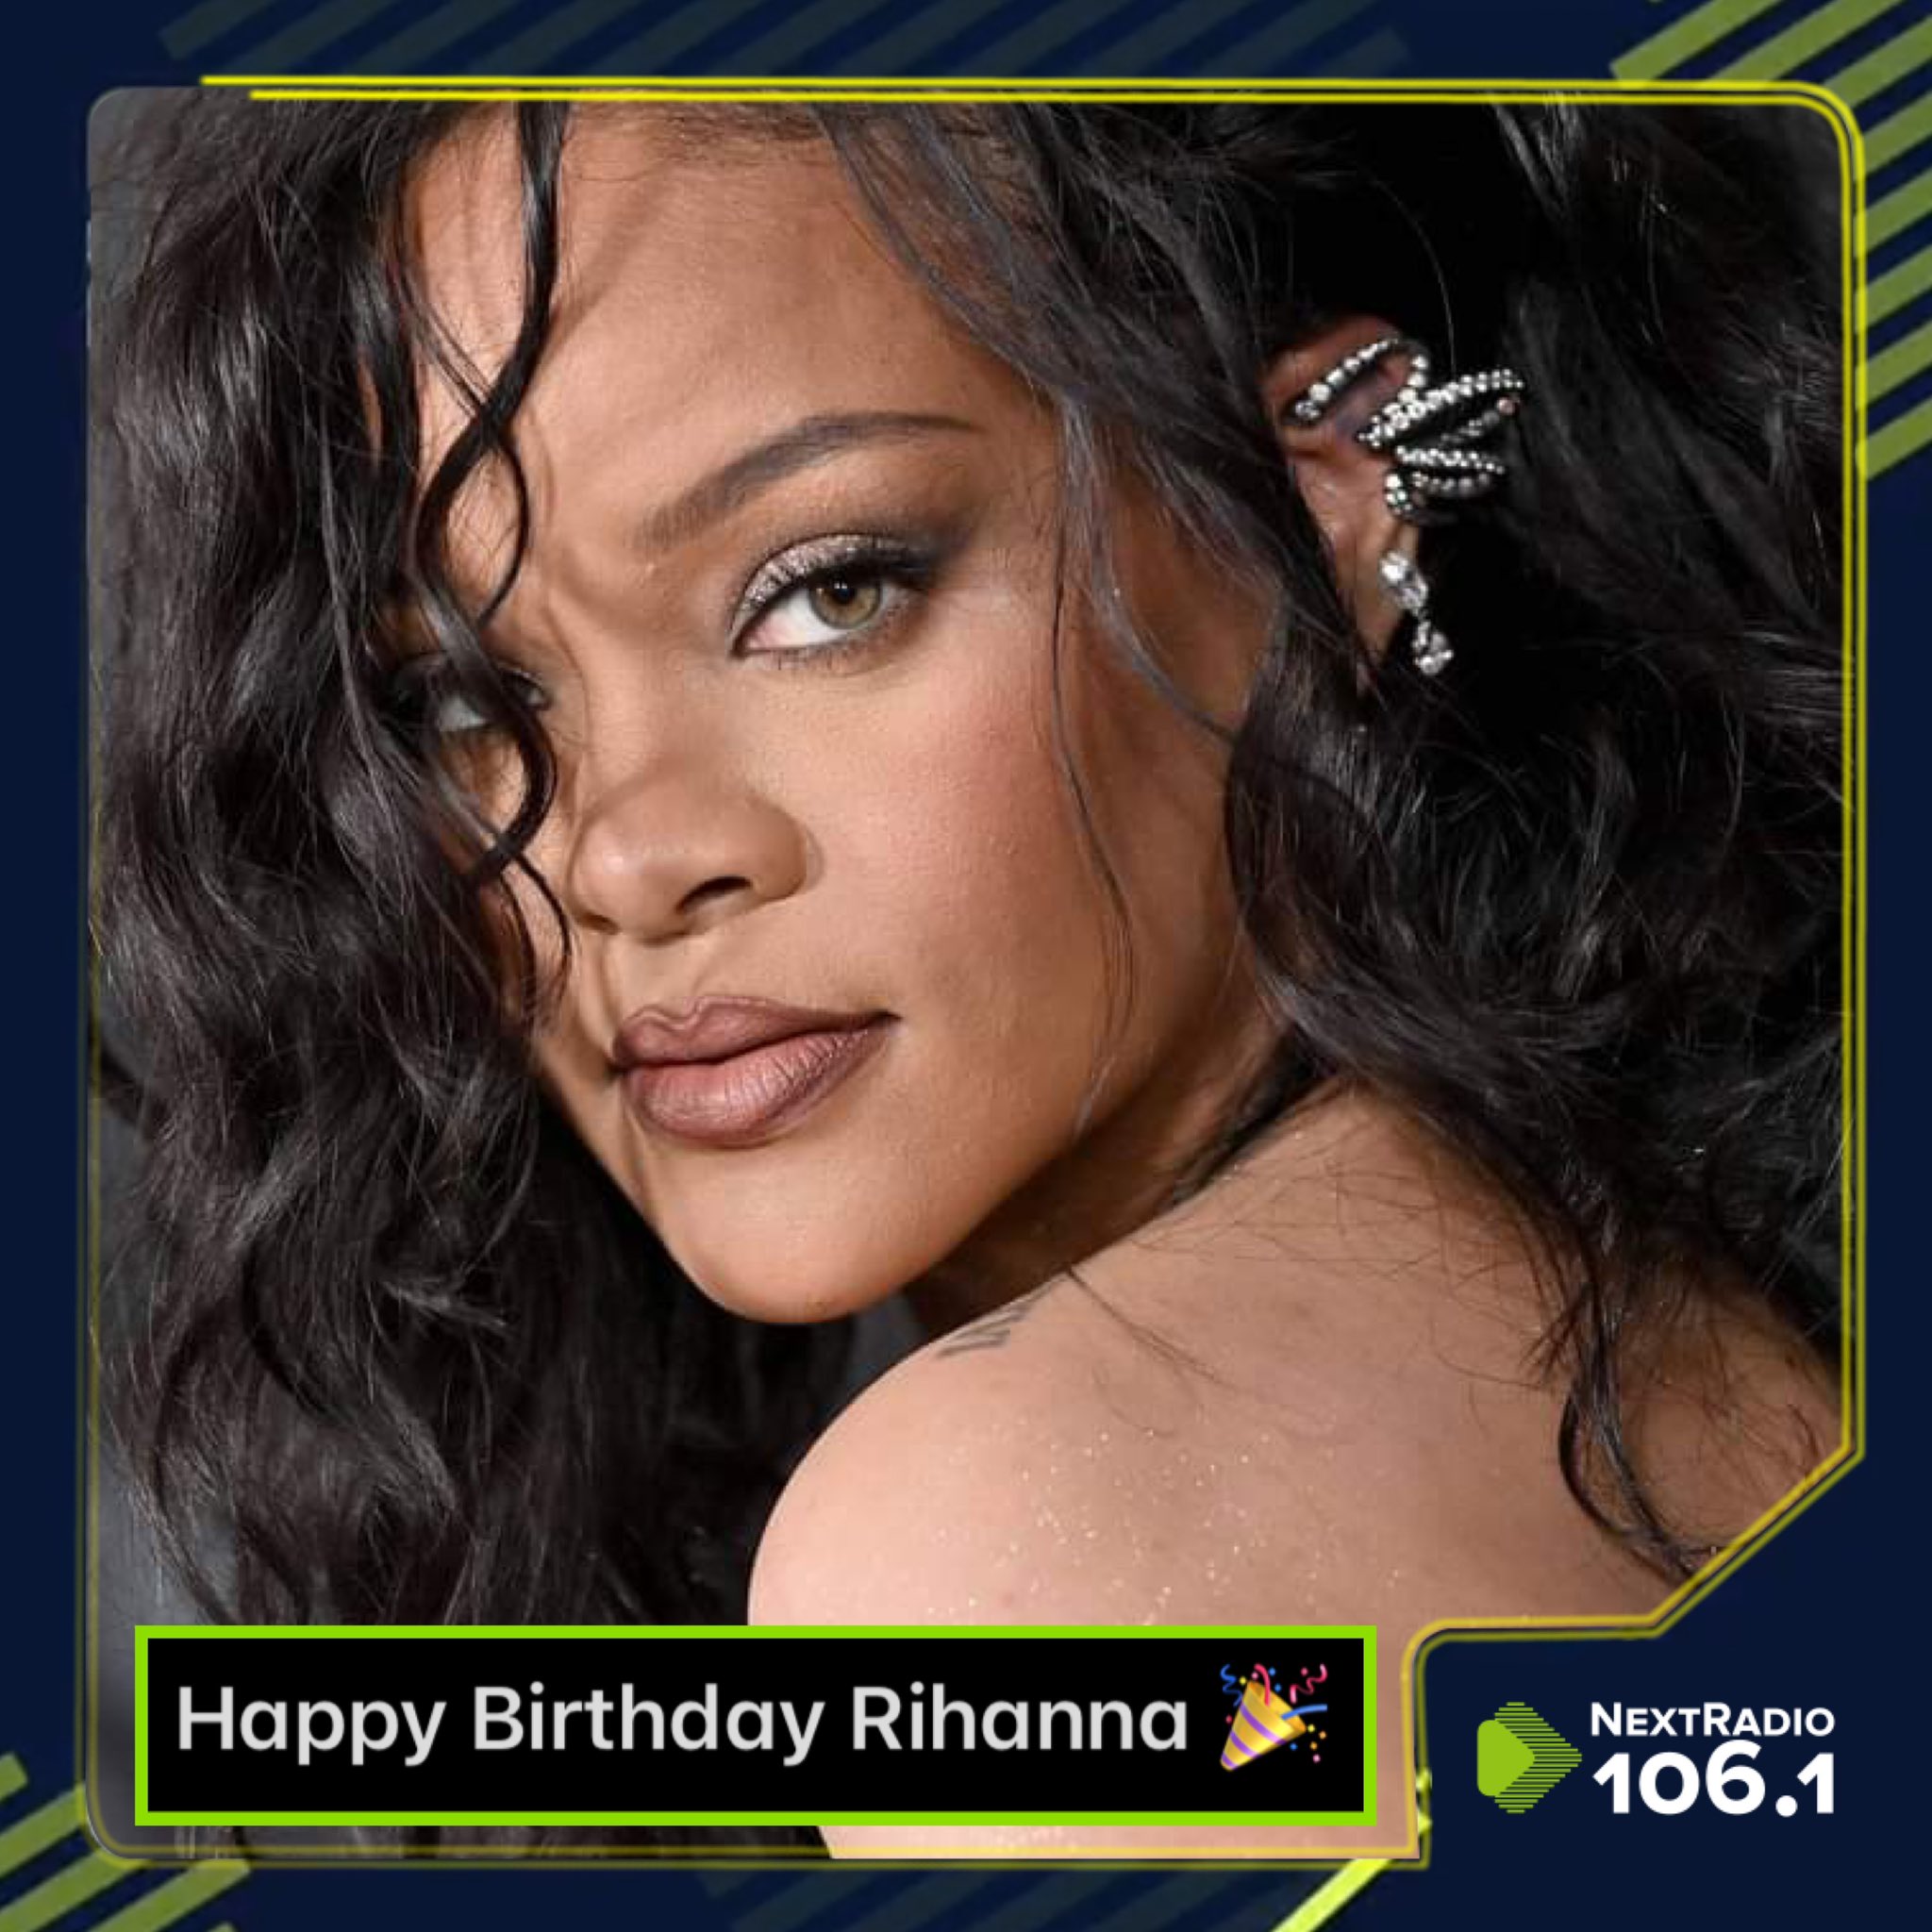 Happy 35th birthday Rihanna. What inspires you about her?  